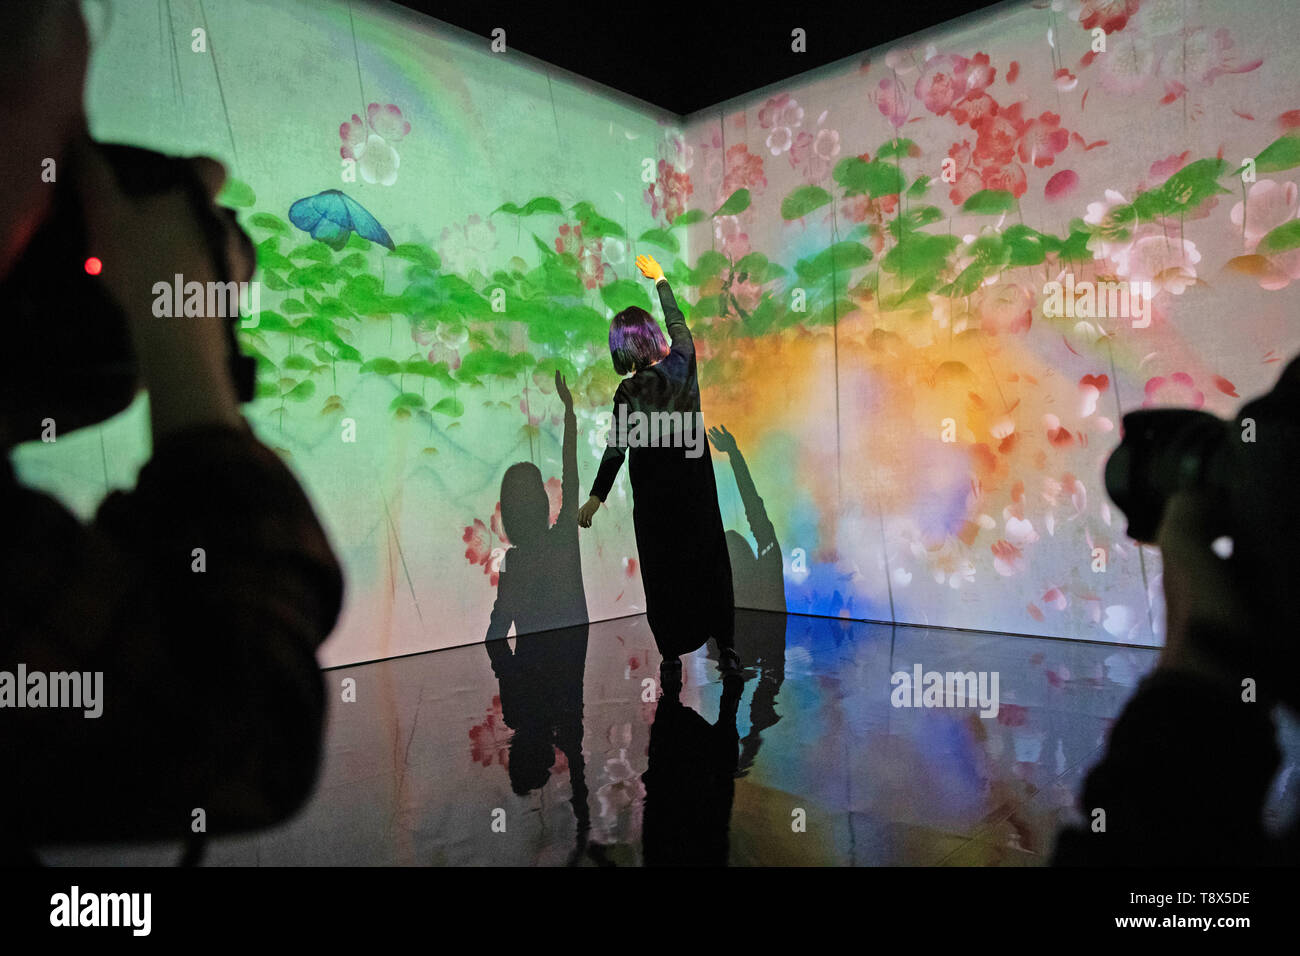 A women interacts with the 'What a Loving and Beautiful World' digital installation at a press preview for 'AI: More Than Human' exhibition at the Barbican Centre in London. The major new exhibition explores the relationship between humans and artificial intelligence. Stock Photo